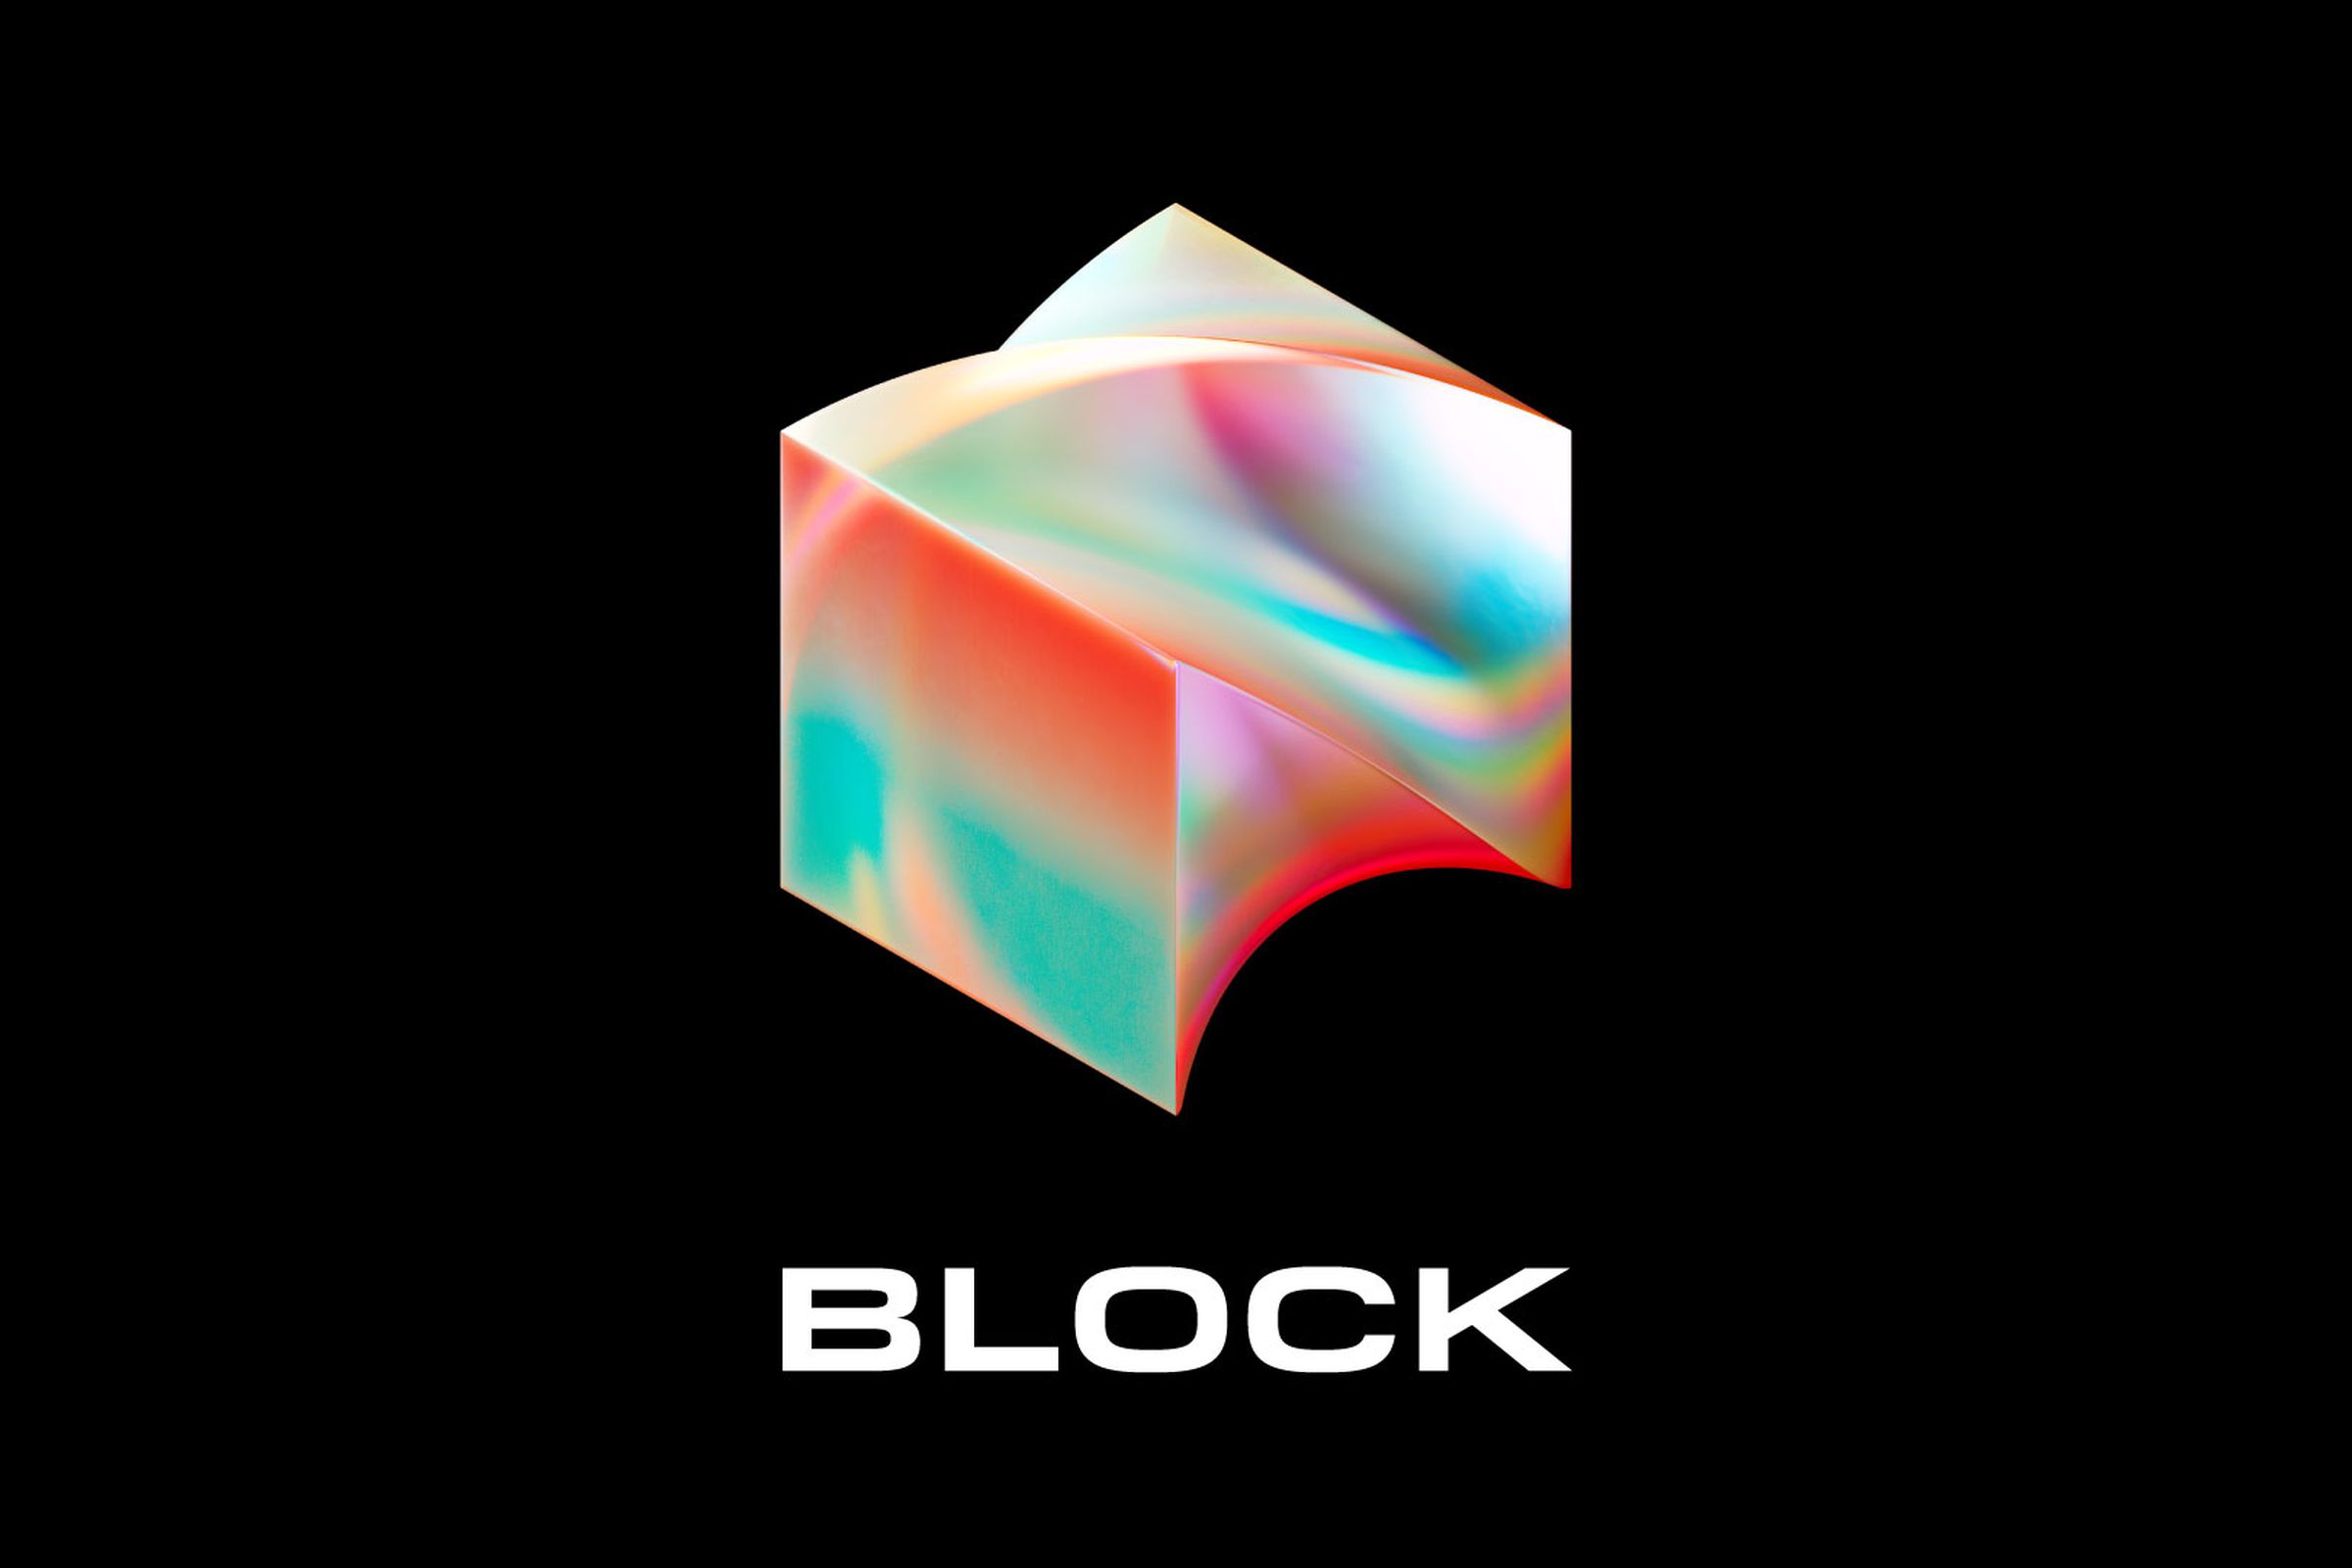 A cube-like block is in the middle of the image above the text “Block”